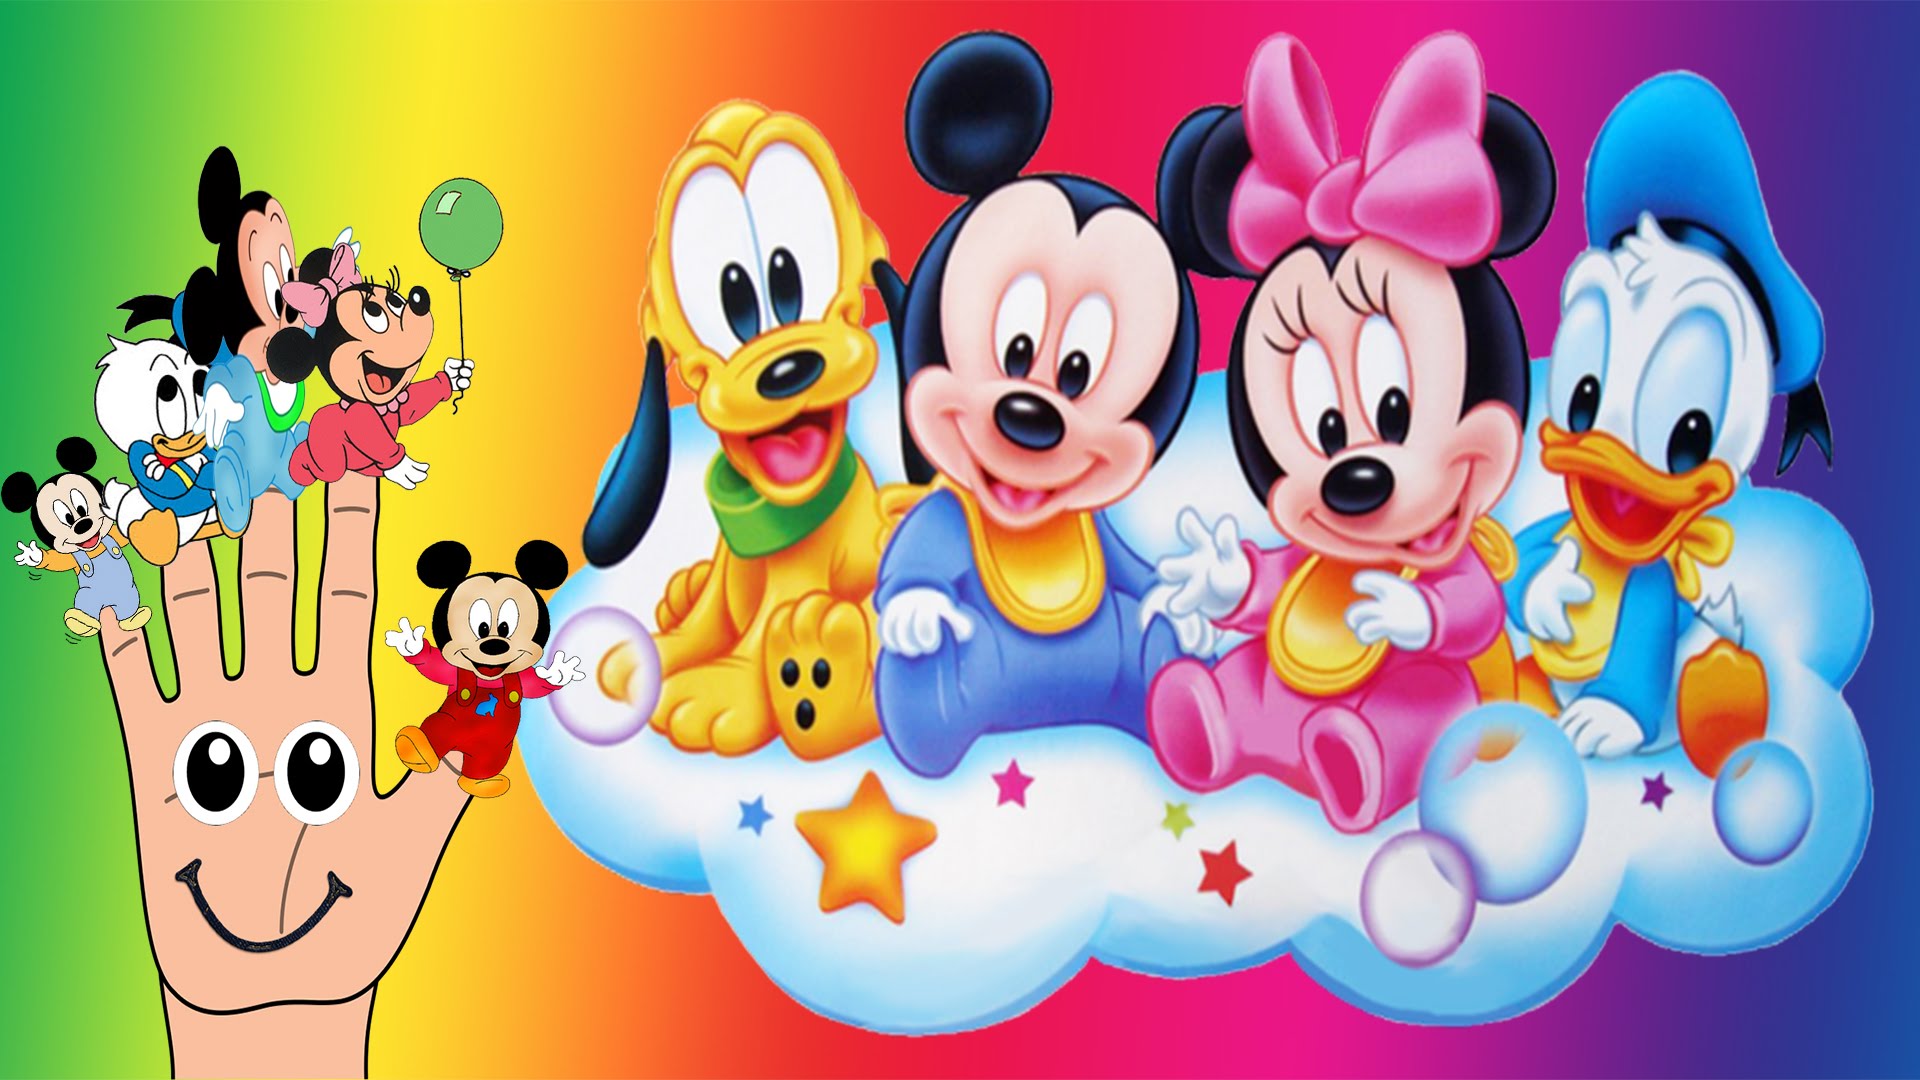 Adorable Baby Mickey Mouse Pluto Minnie Donald Duck Desktop Wallpaper Hd Wallpapers13 Com